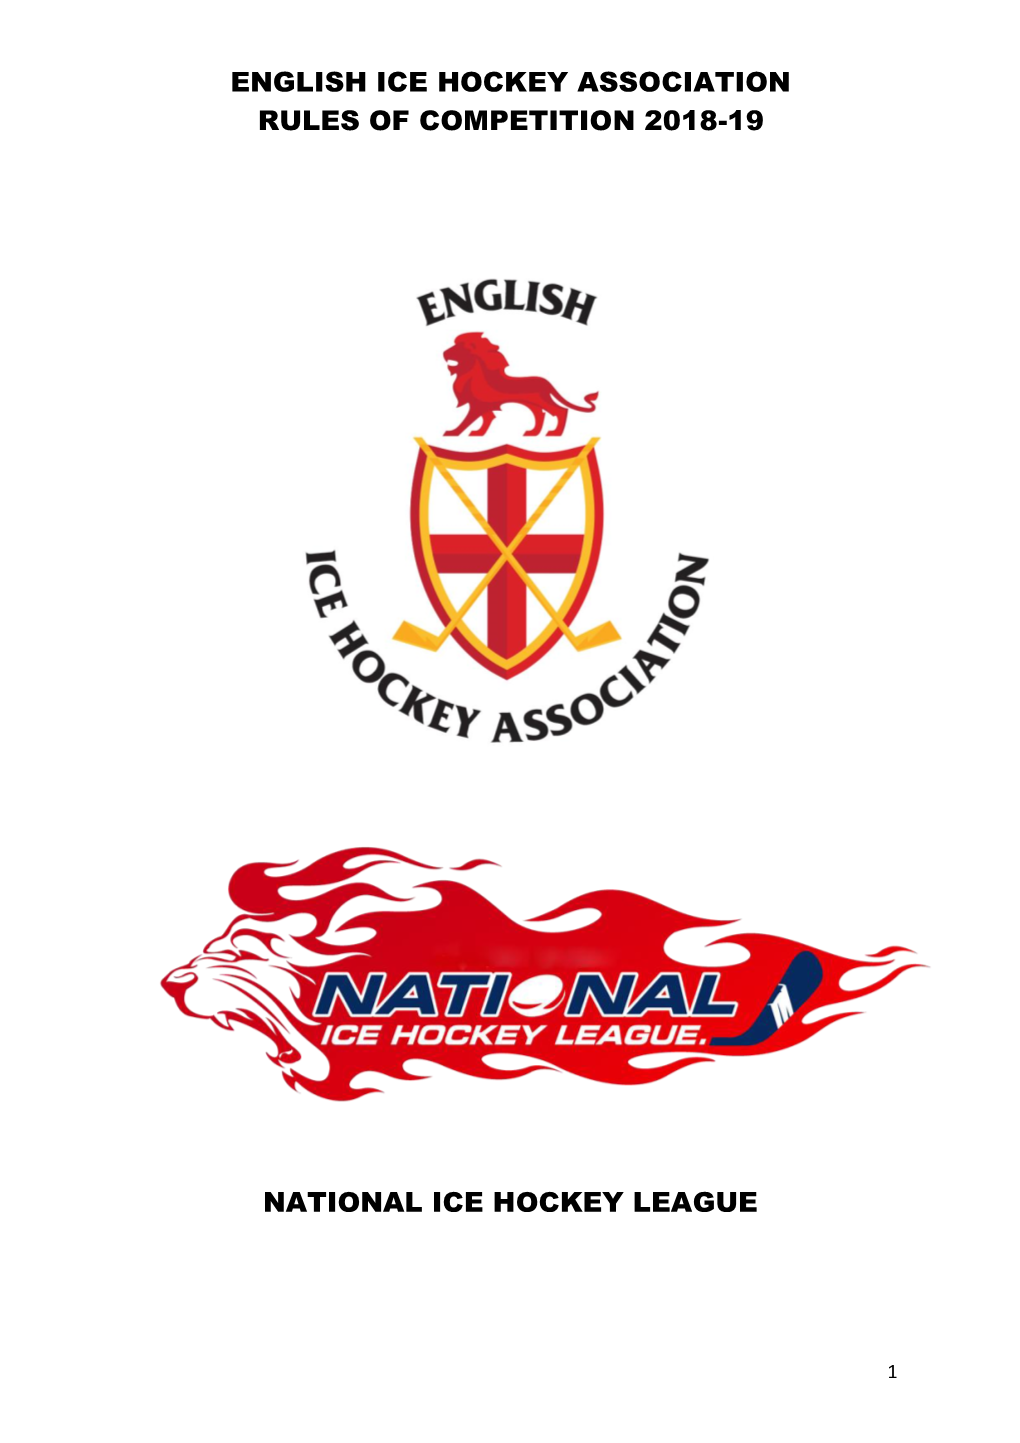 English Ice Hockey Association Rules of Competition 2018-19